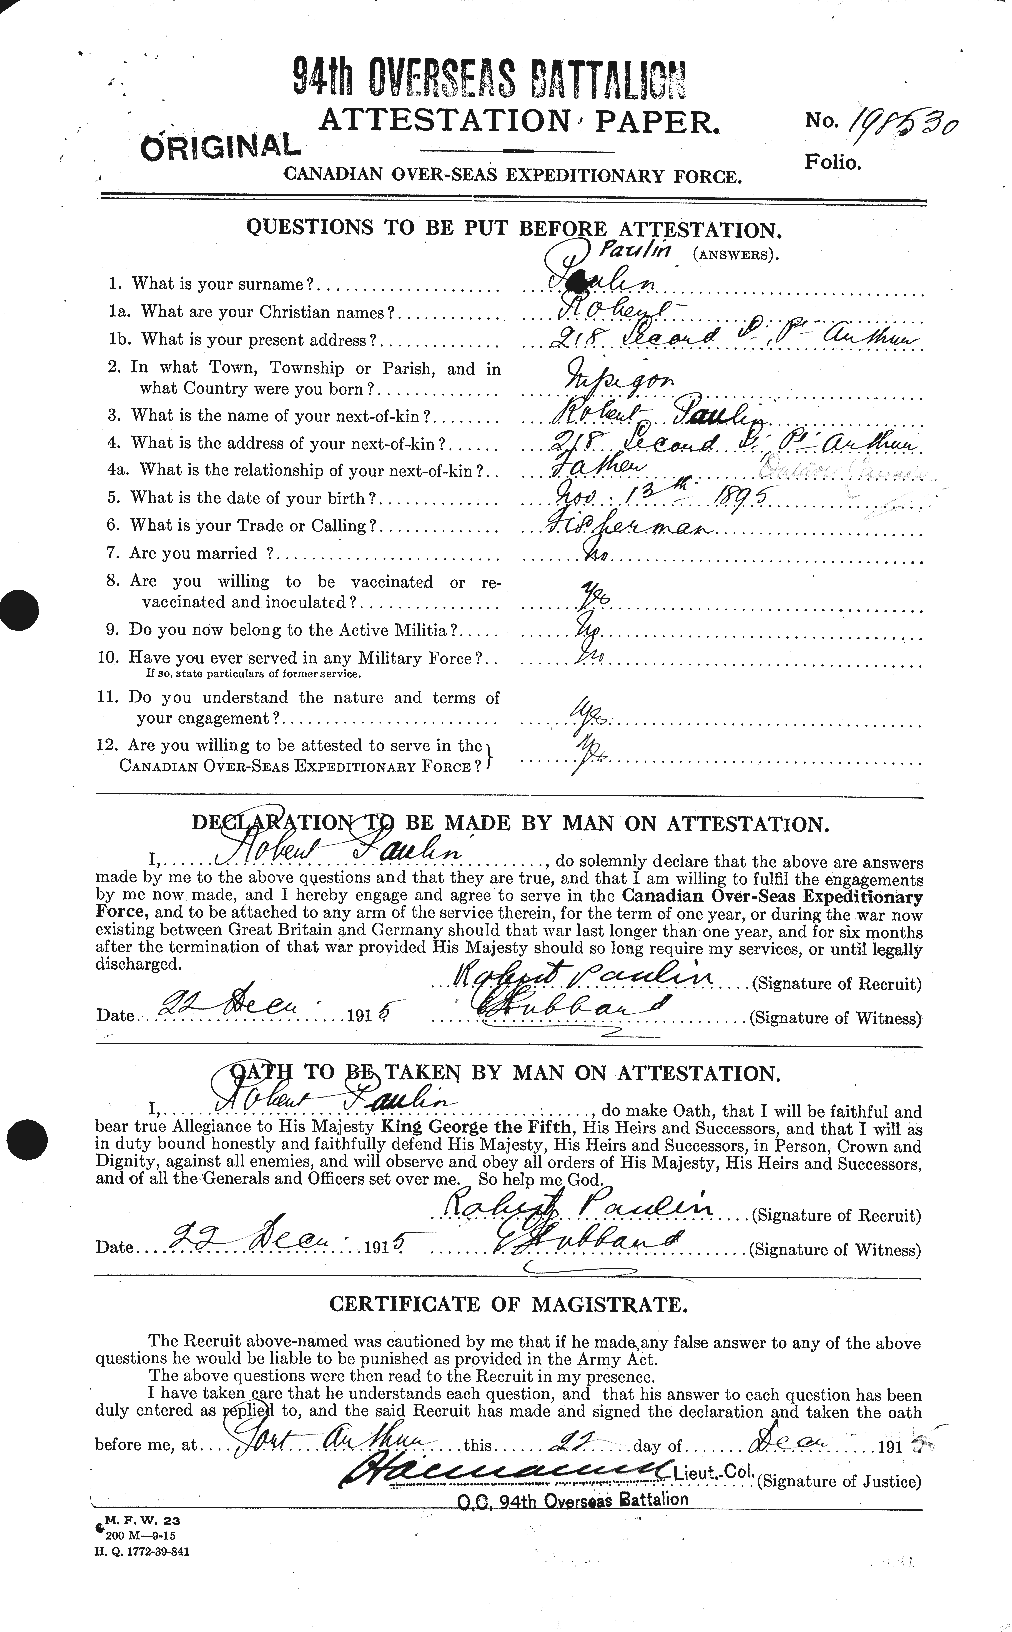 Personnel Records of the First World War - CEF 584800a